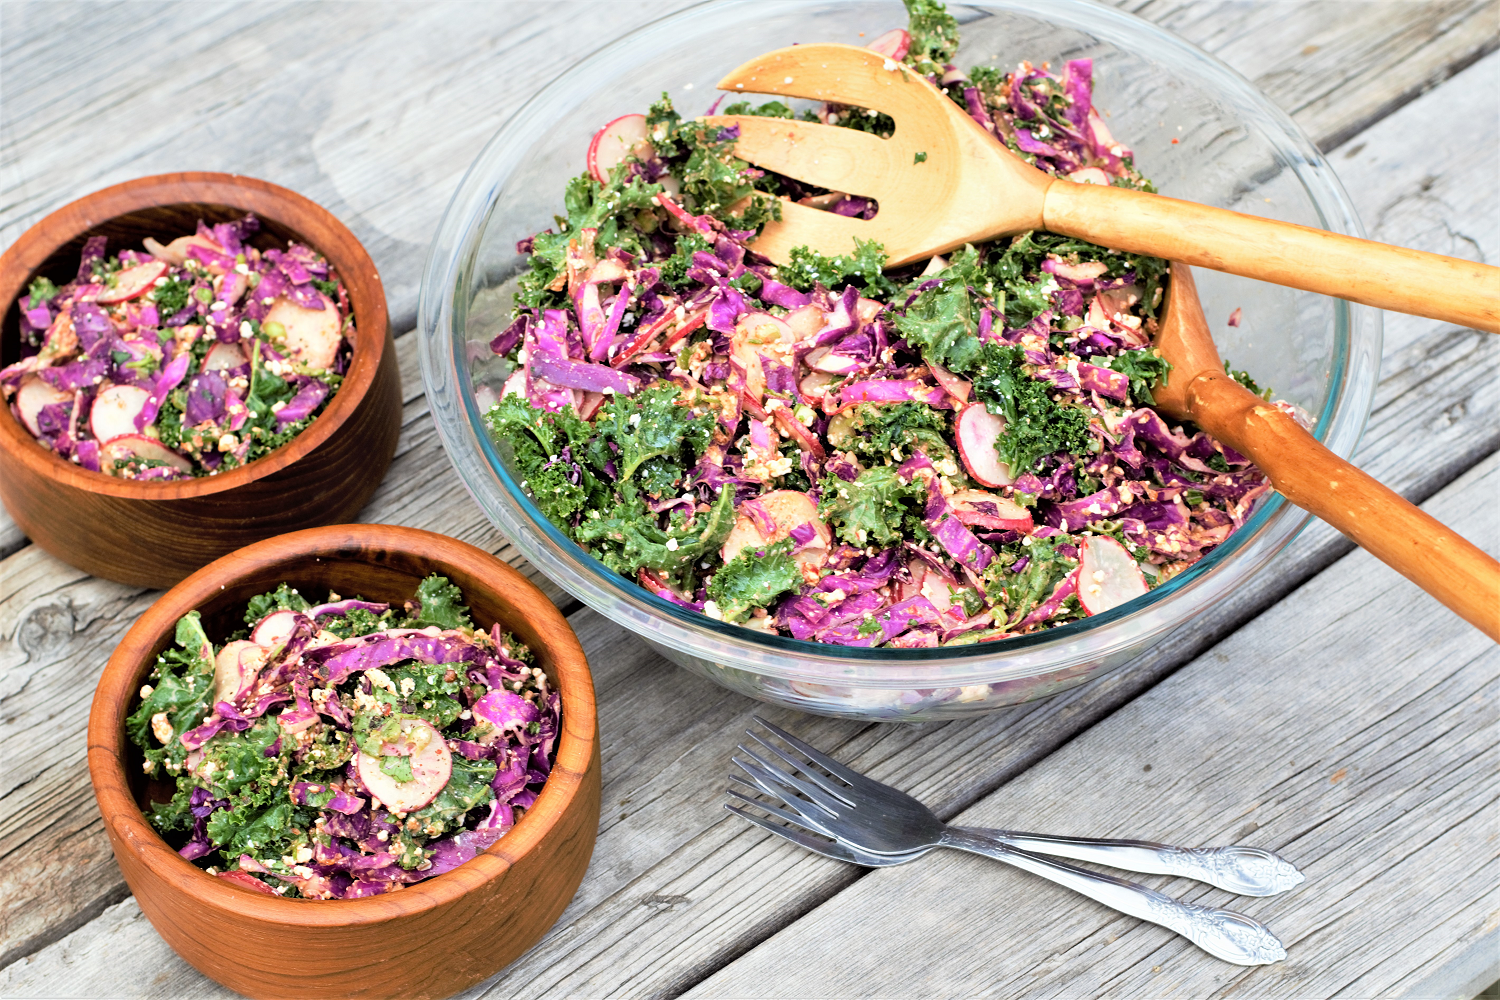 This kale slaw salad stays crunchy hours after adding dressing, perfect for picnicking! Kale & red cabbage pair with spicy radish & mexican-ish dressing.